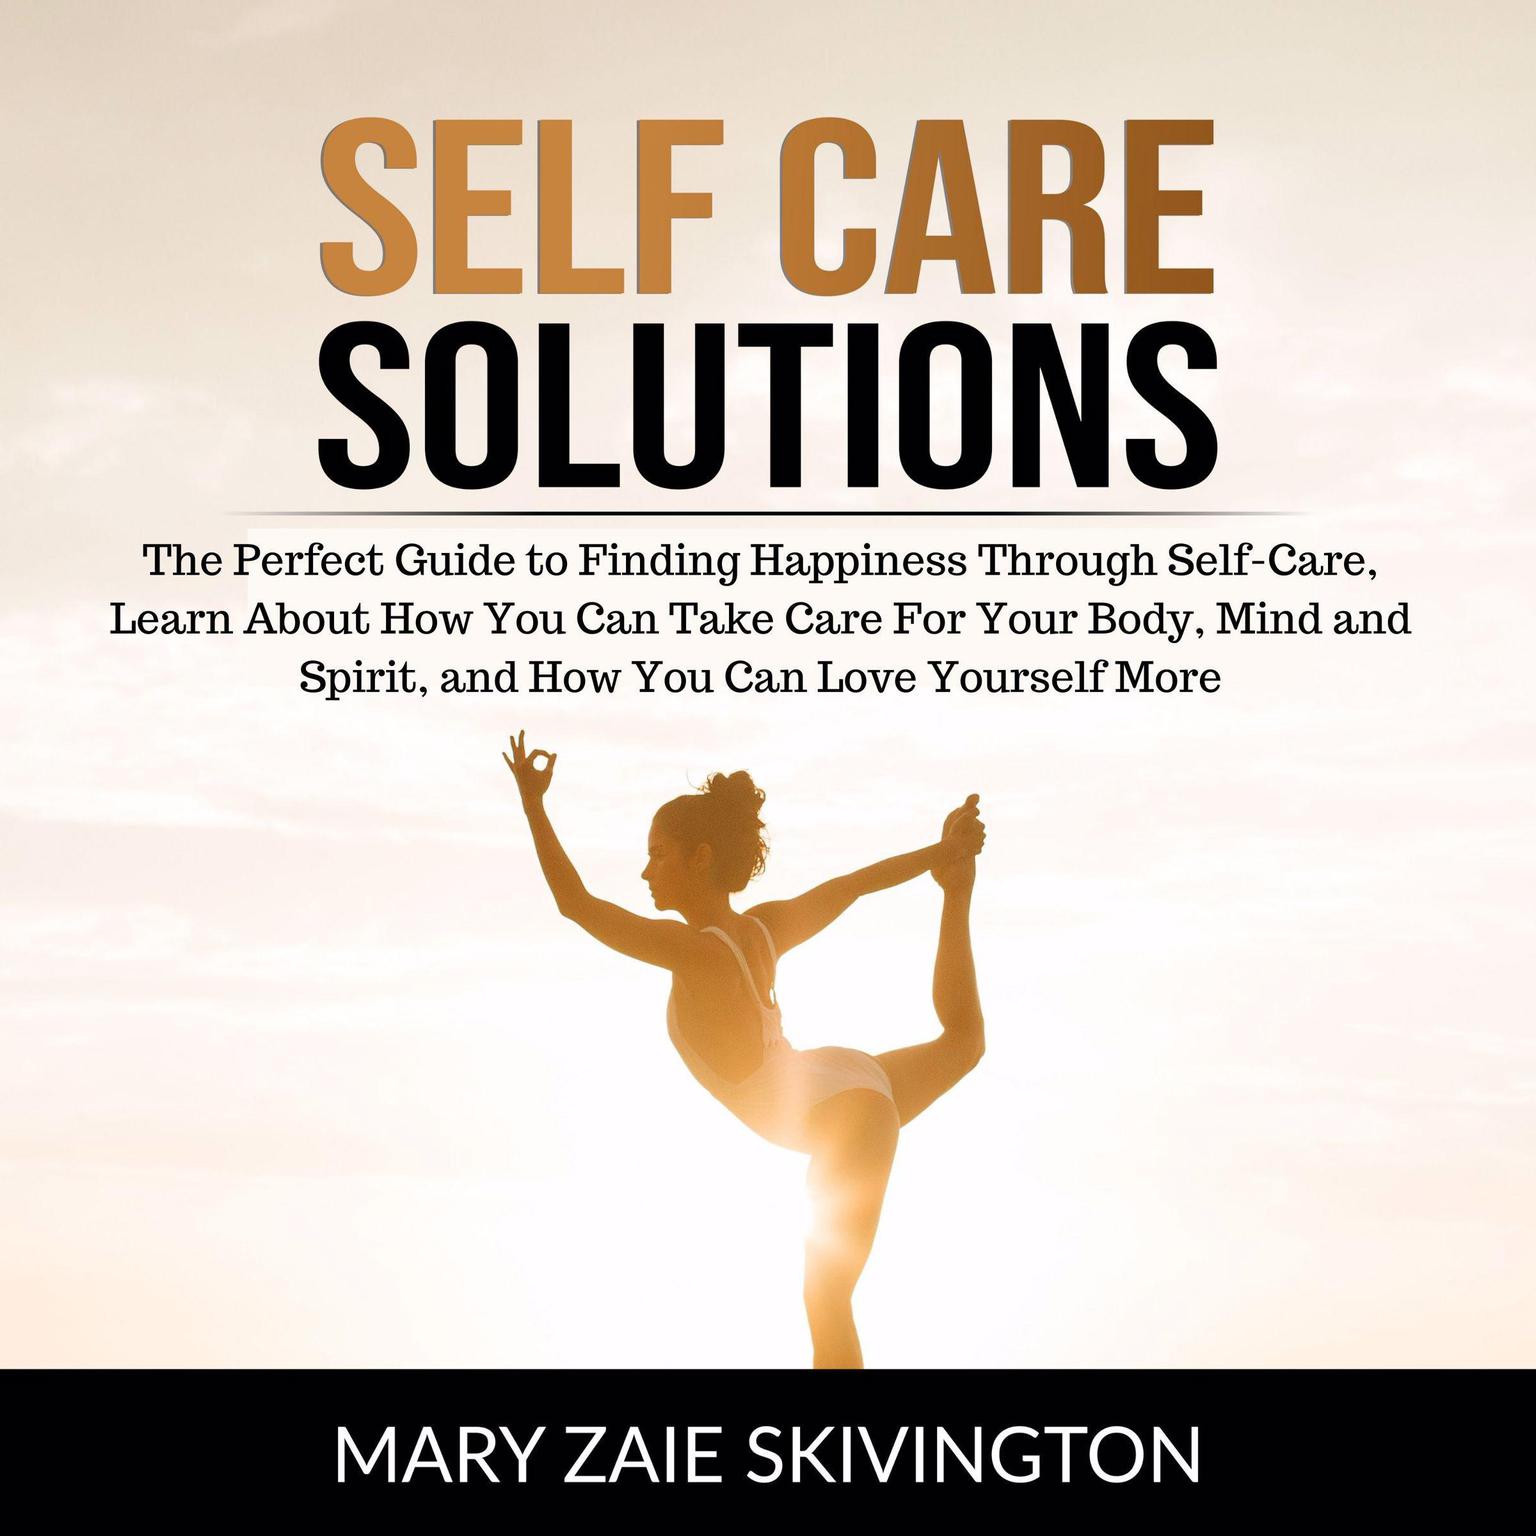 Self Care Solutions: The Perfect Guide to Finding Happiness Through Self-Care, Learn About How You Can Take Care For Your Body, Mind and Spirit and How You Can Love Yourself More Audiobook, by Mary Zaie Skivington